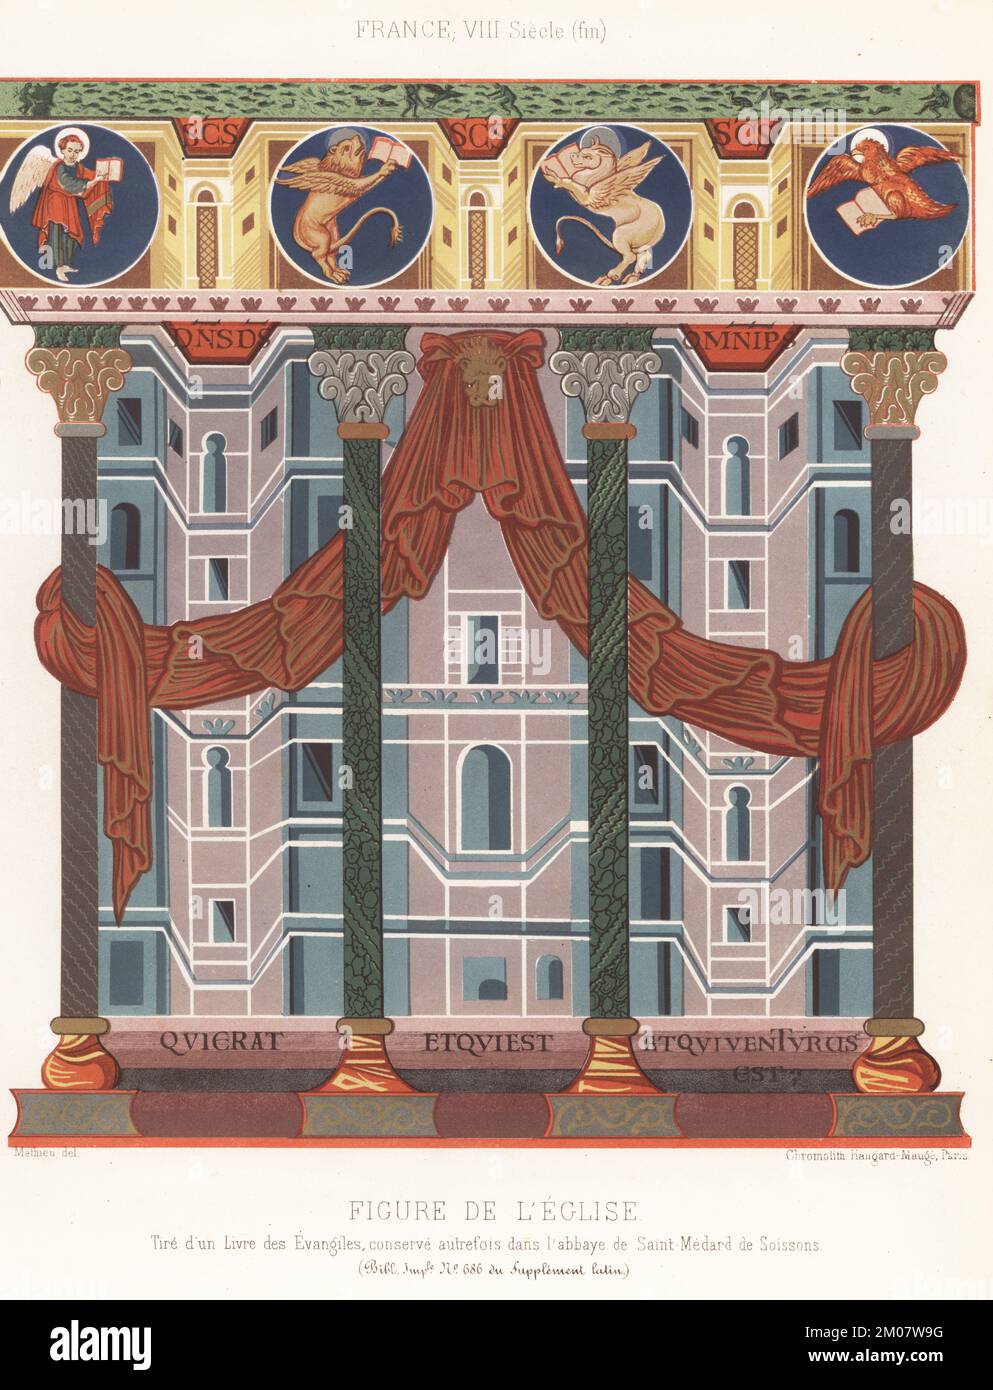 The Temple of Jerusalem with columns and drapes. Four allegorial evangelists at top: angel Matthew, bull Luke, lion Mark, and eagle John. Figure de l'Eglise, France, VIIIe siecle. Taken from a manuscript formerly kept at the Abbey of Saint-Medard de Soissons. MS 686 Sup. Latin, Bibliotheque Imperiale. Chromolithograph after an illustration by Mathieu from Charles Louandre’s Les Arts Somptuaires, The Sumptuary Arts, Hangard-Mauge, Paris, 1858. Stock Photo